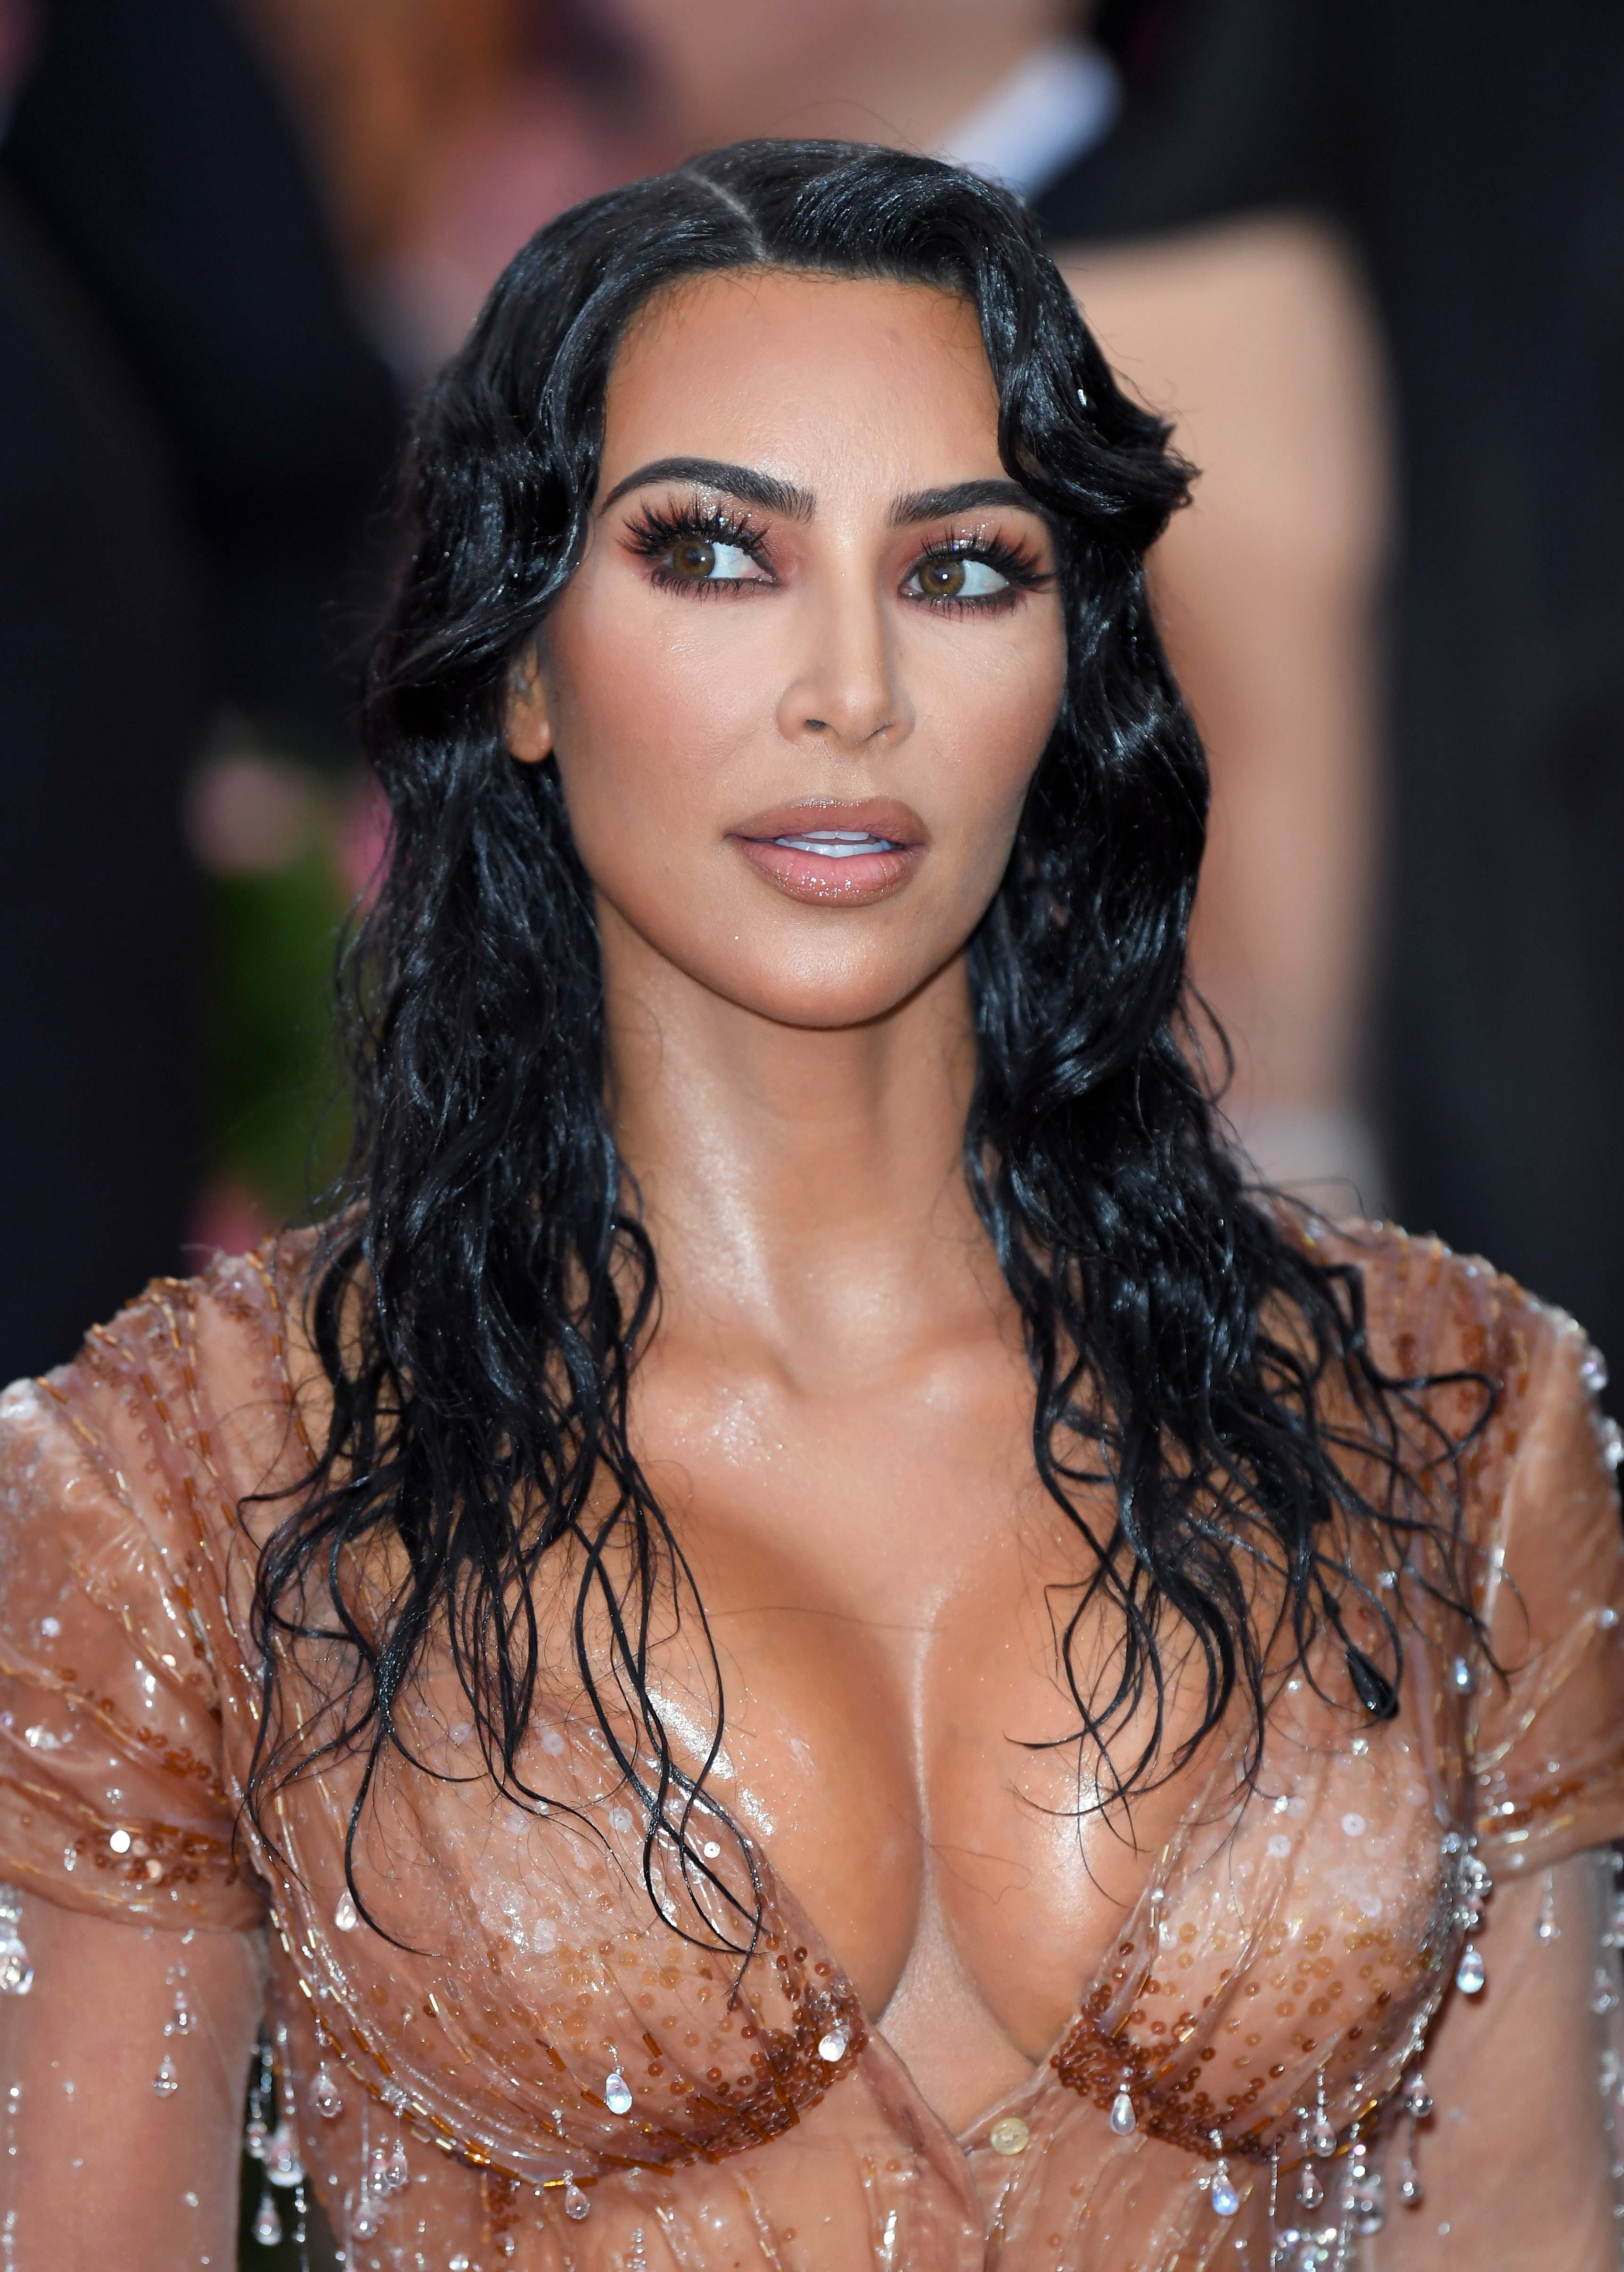 Kim Kardashian West at the 2019 Met Gala on May 6, 2019, in New York. | Source: Getty Images